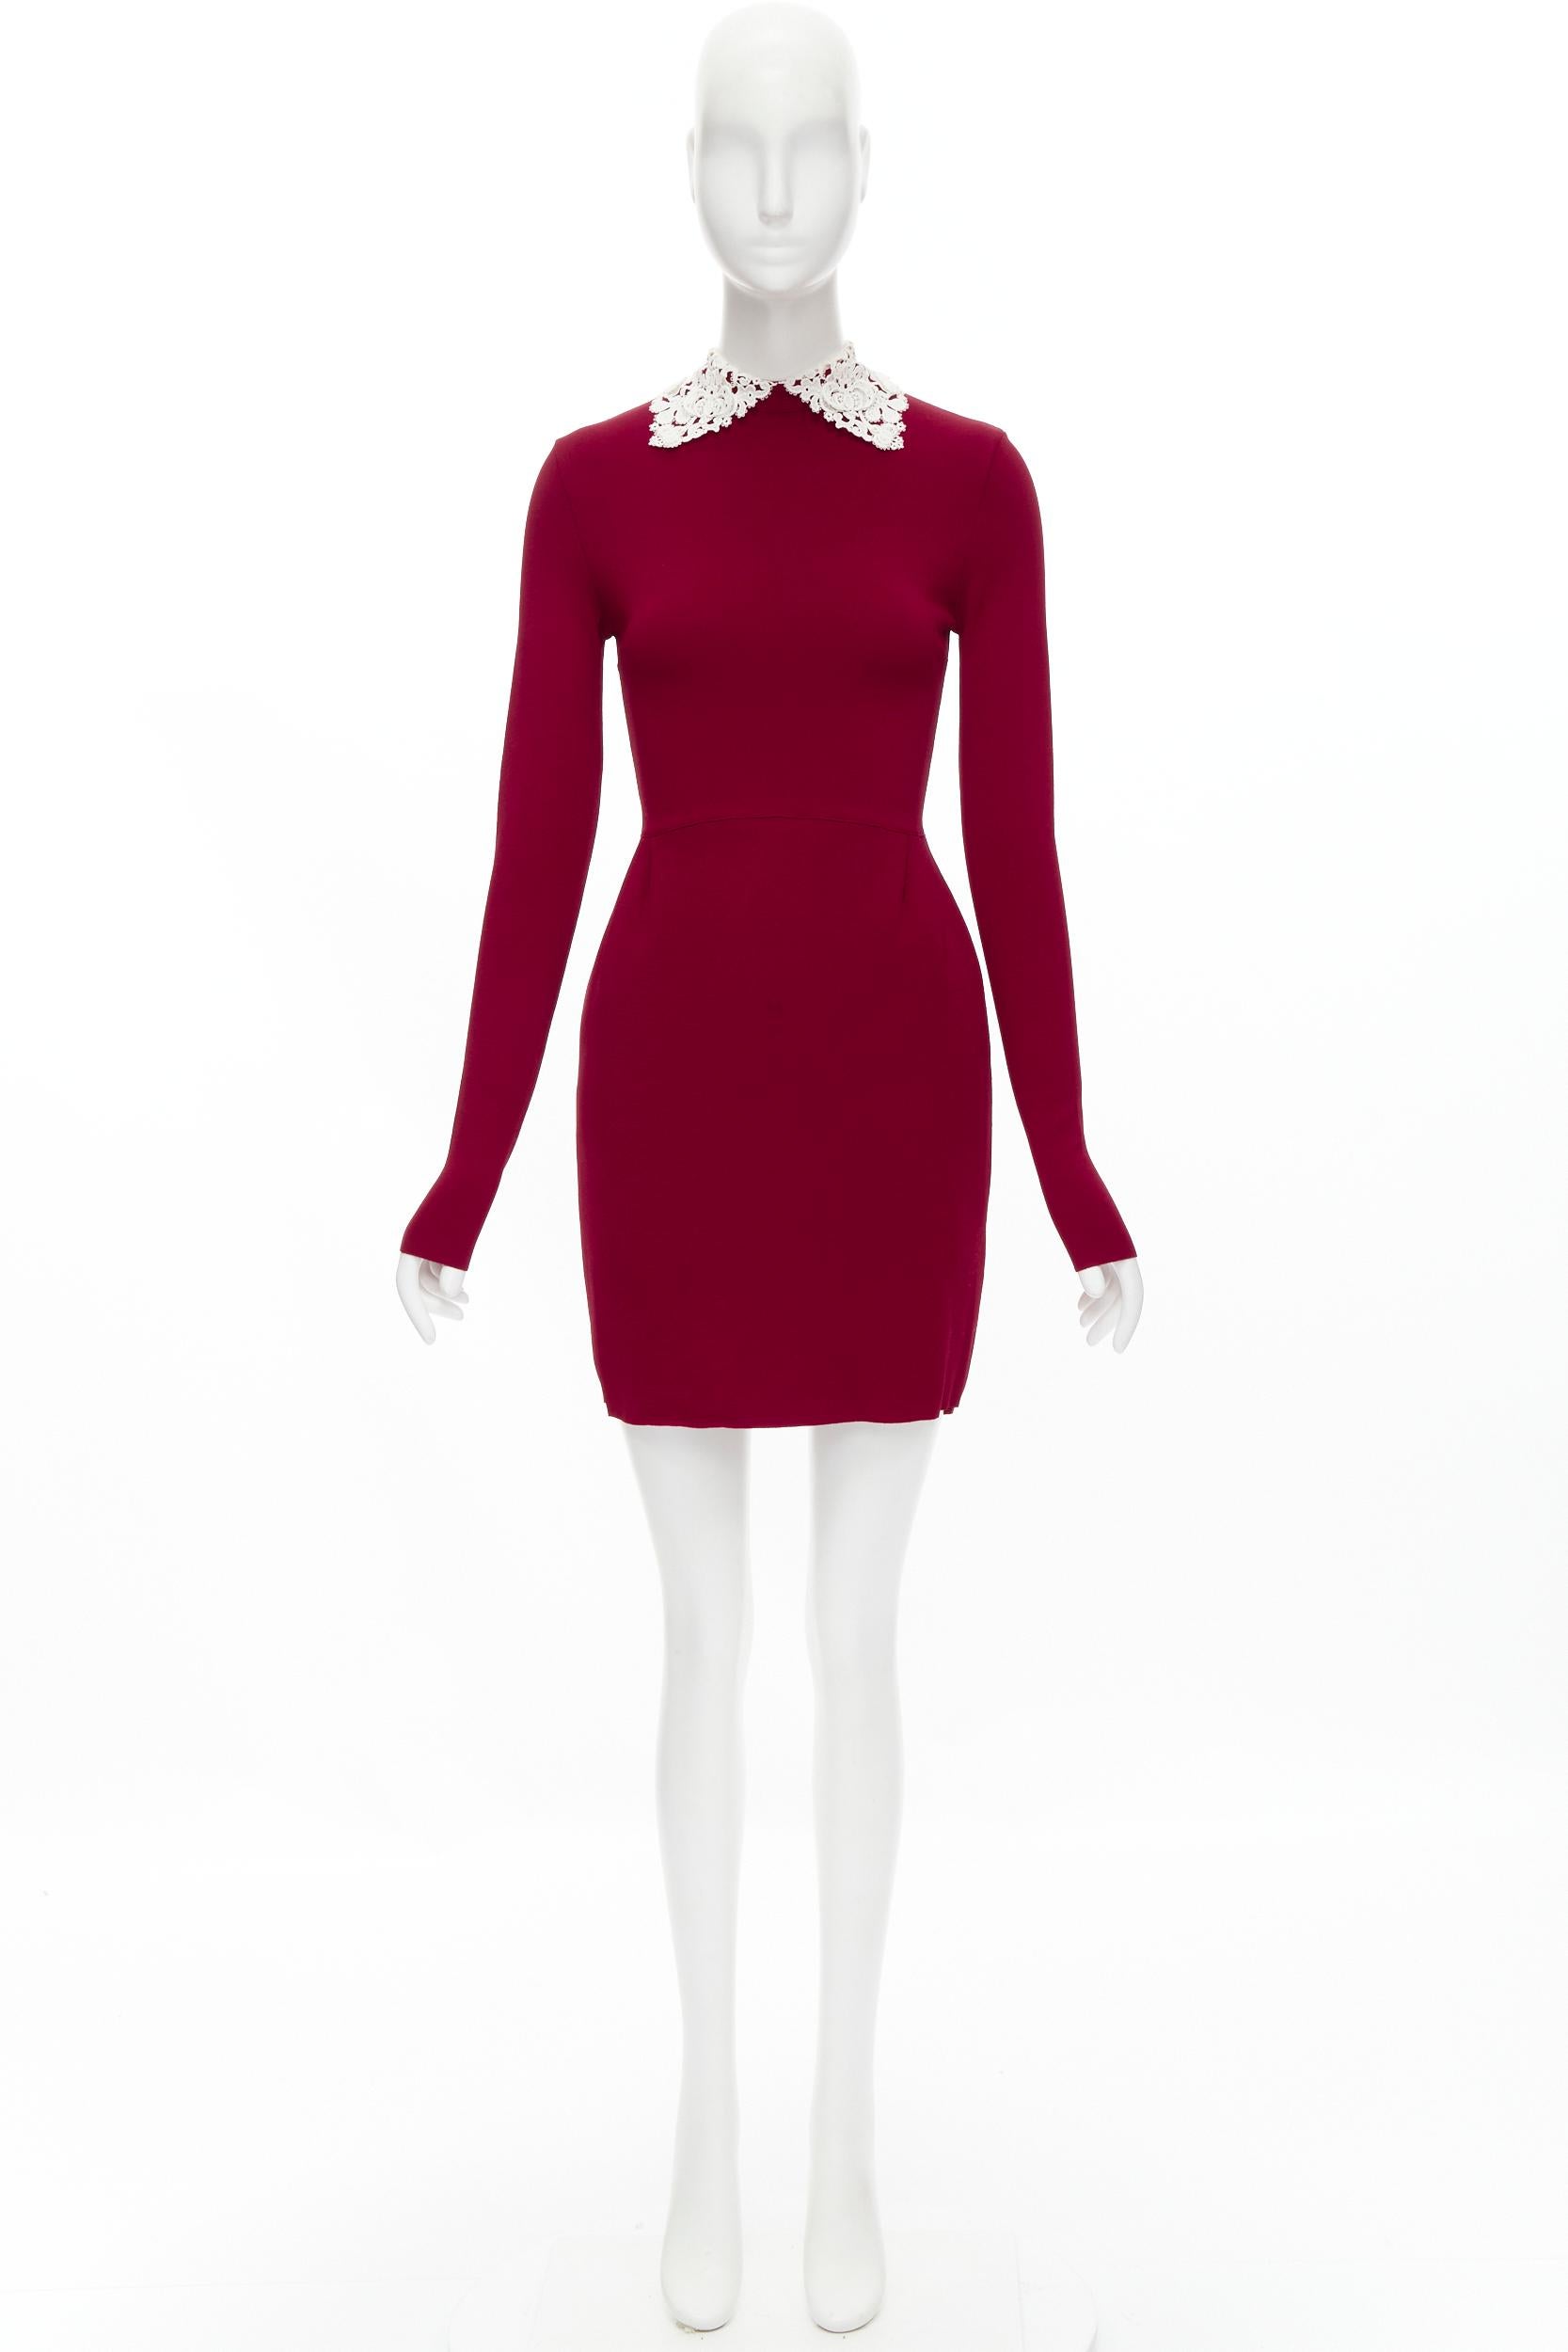 VALENTINO red knitted white lace collar bodycon sheath dress  4